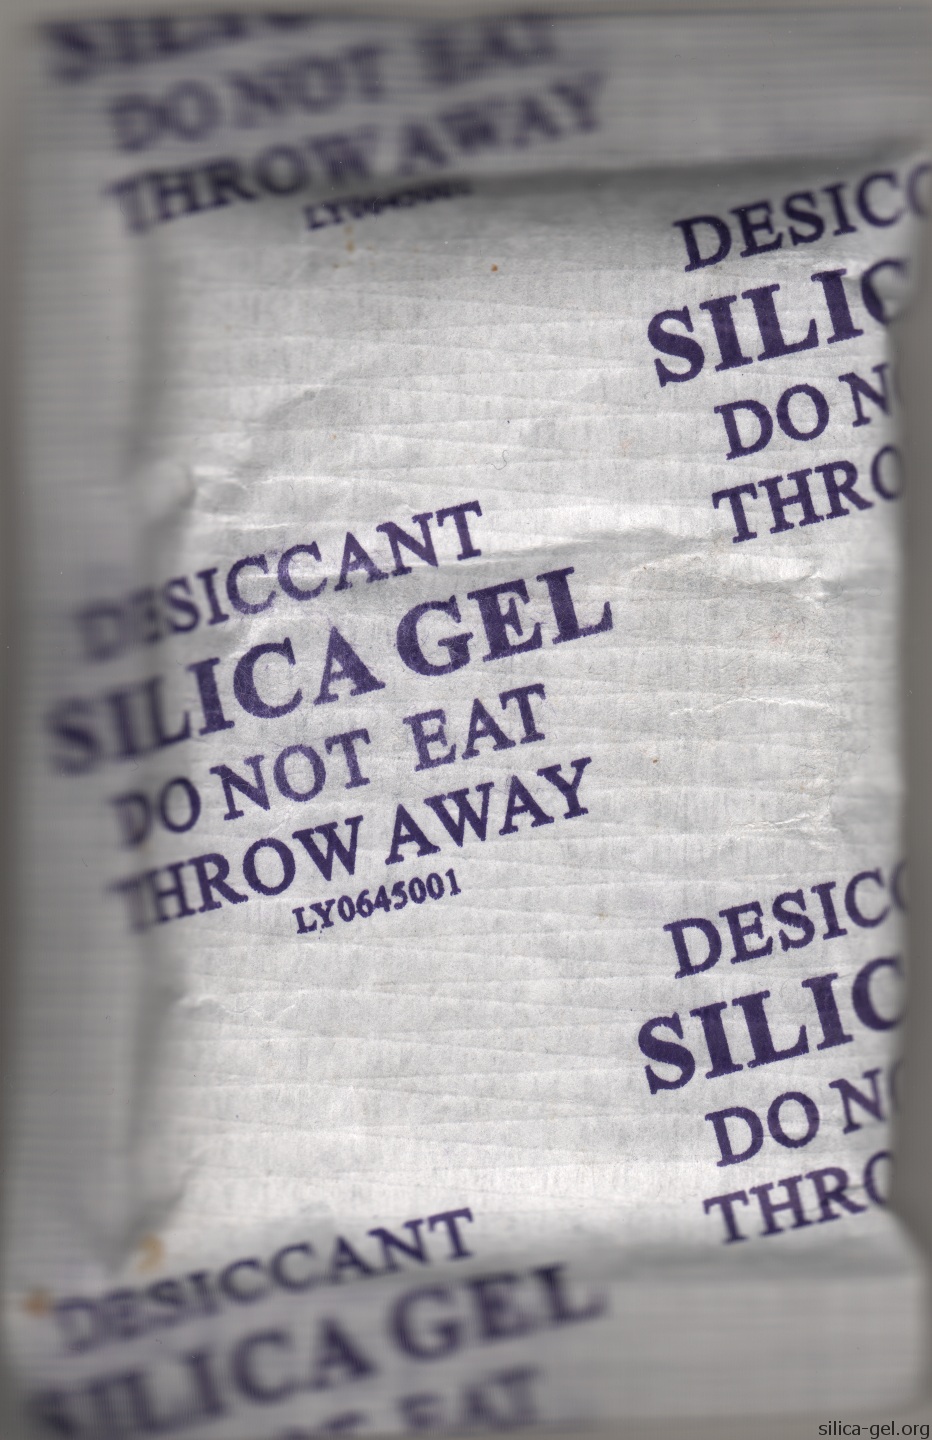 Large Packet With Purple Text and Reinforced Packaging